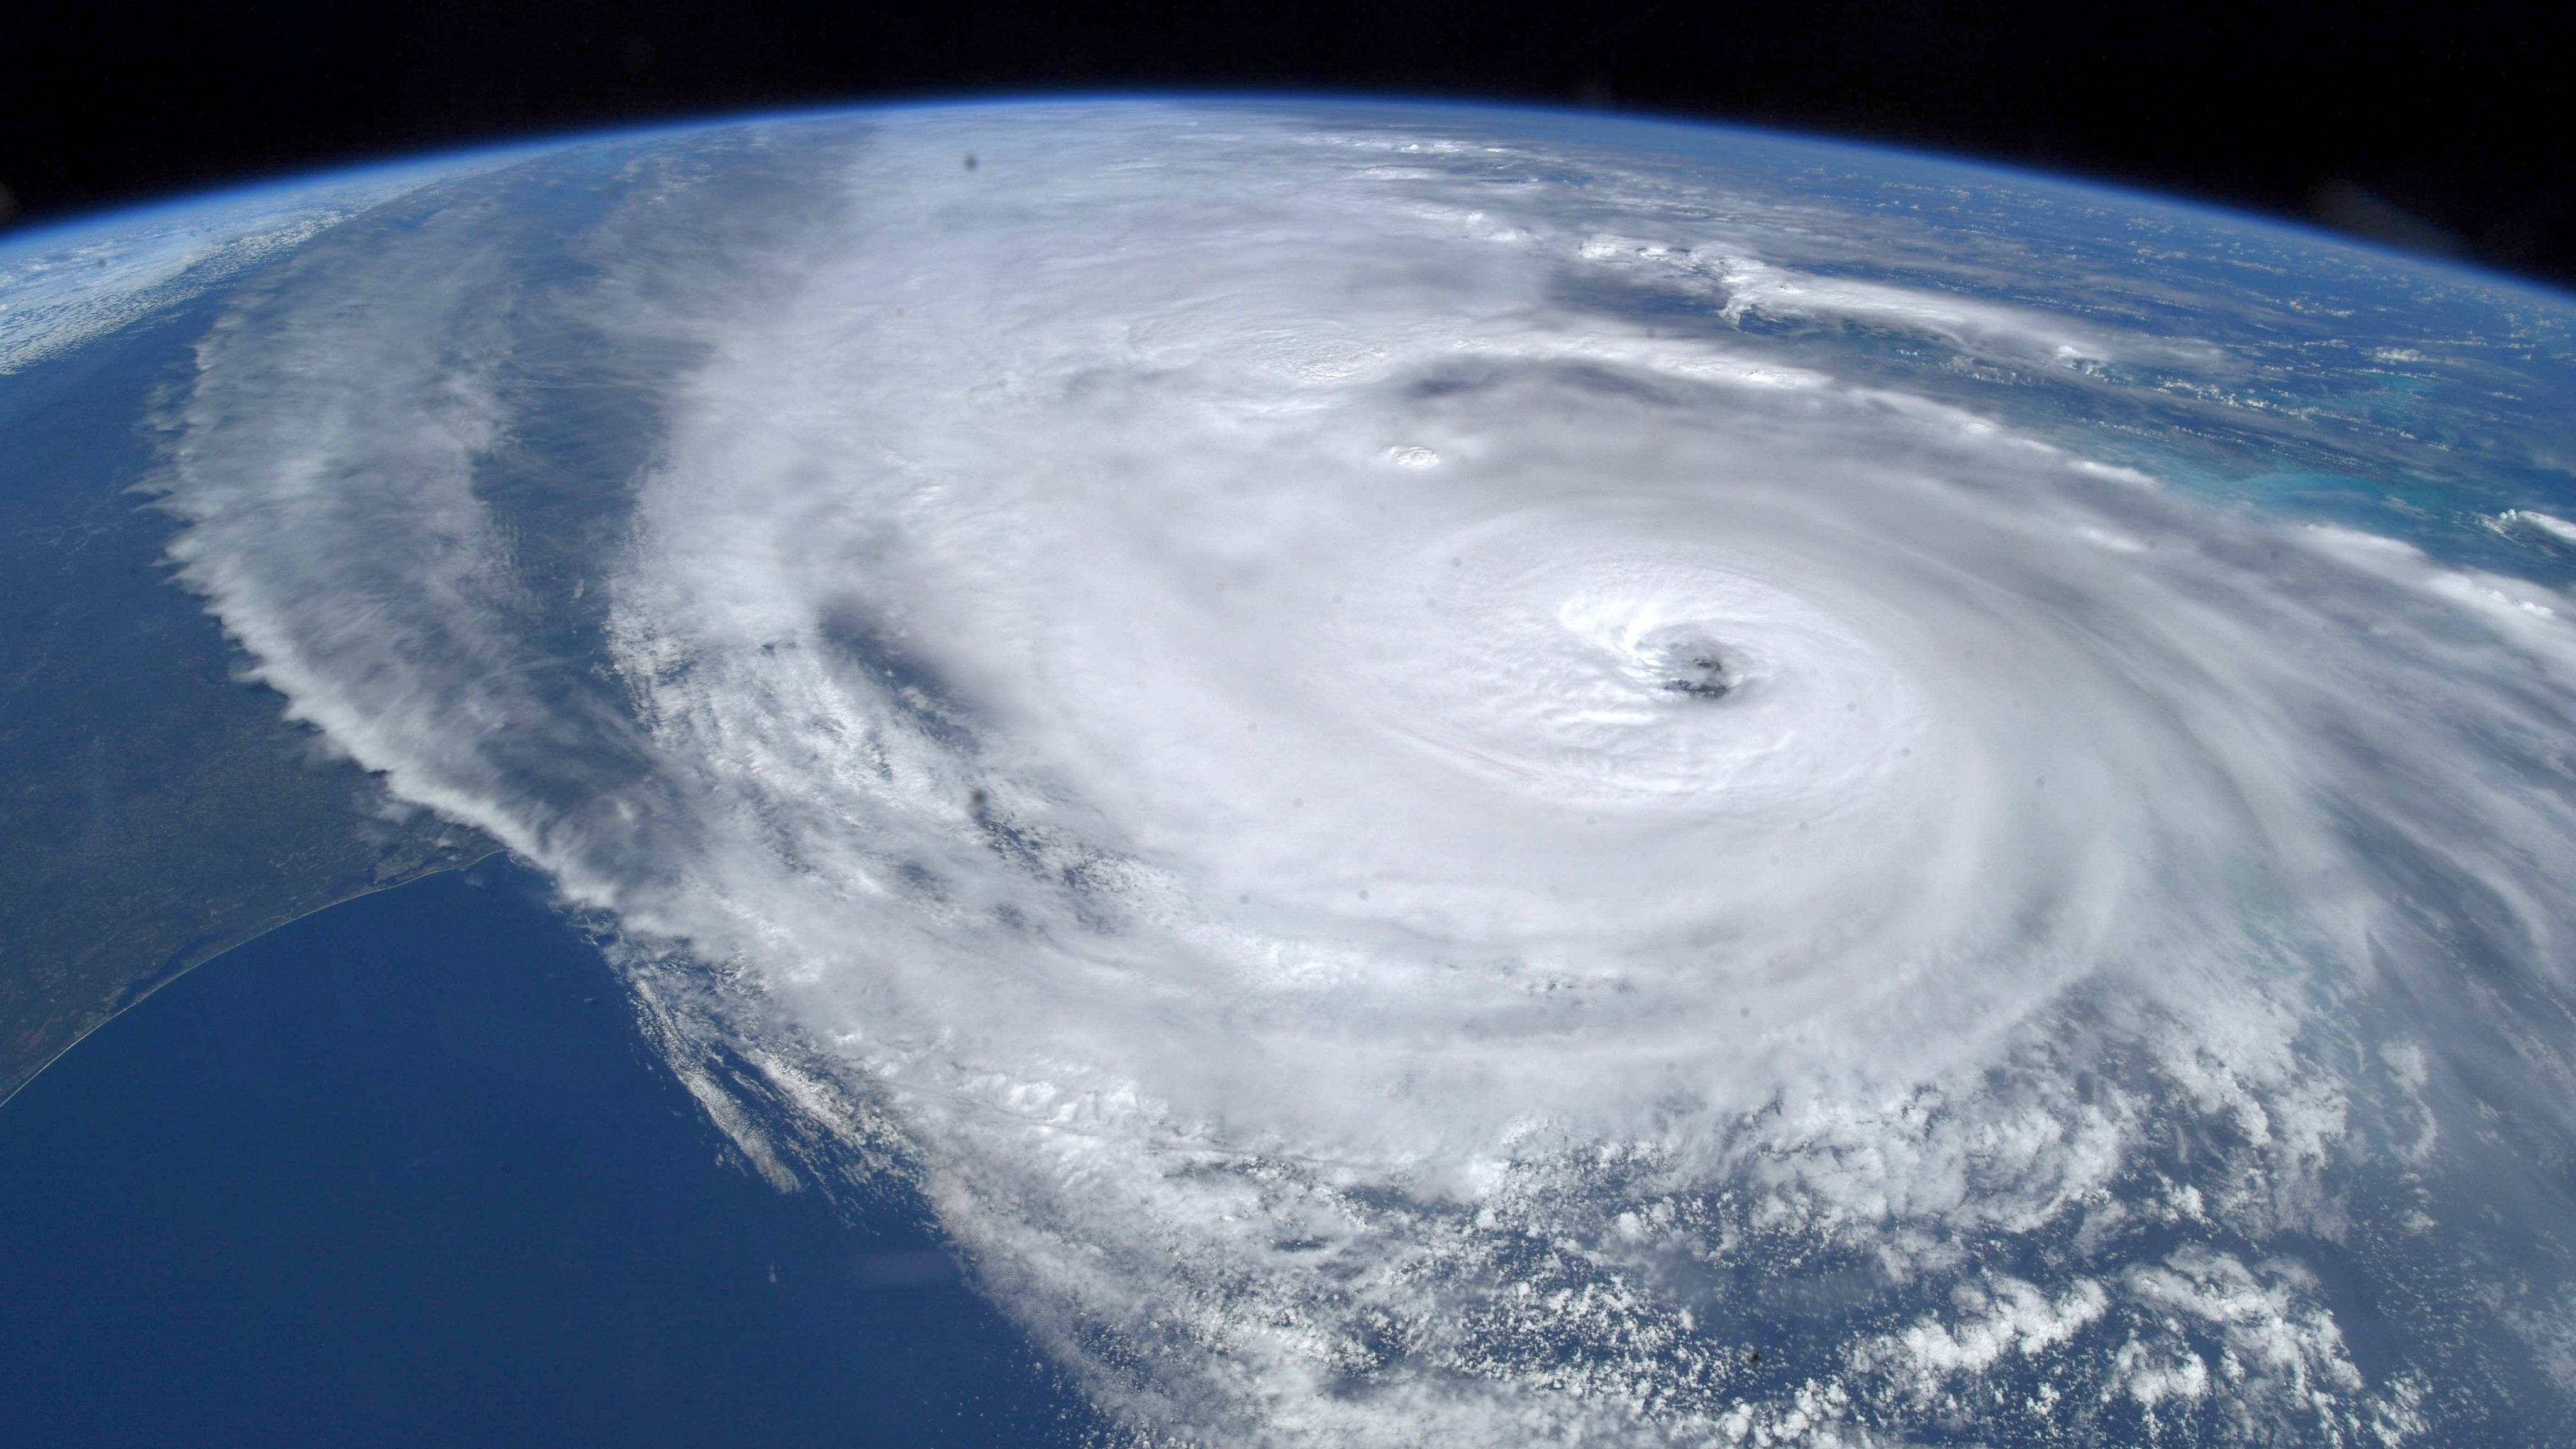 NASA astronaut Bob Hines of Expedition 68 captured this view of Hurricane Ian on September 28, 2022.